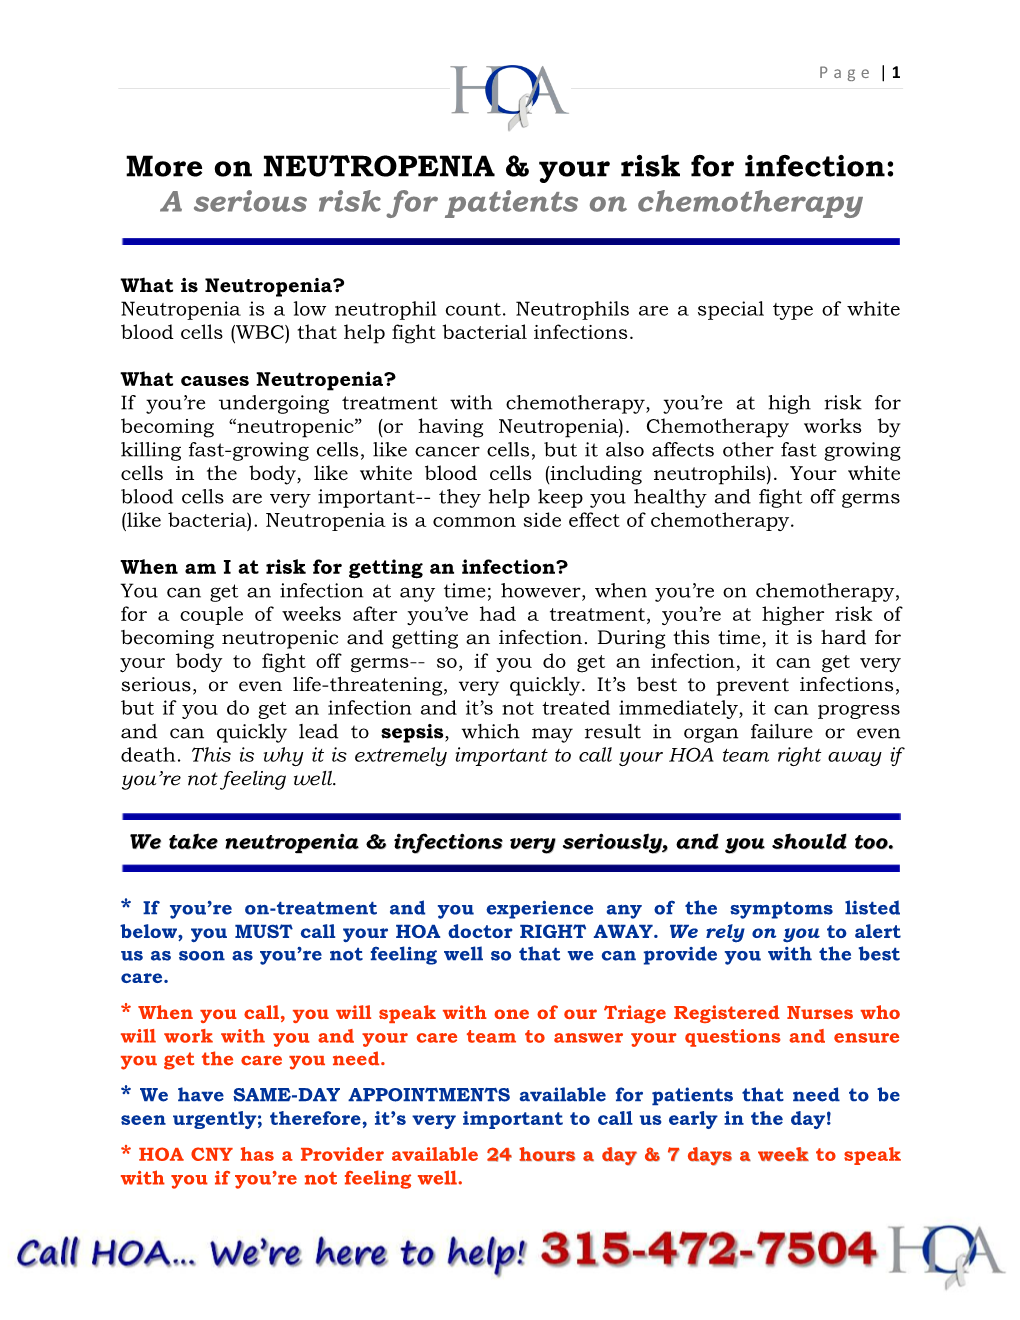 More on NEUTROPENIA & Your Risk for Infection: a Serious Risk for Patients on Chemotherapy